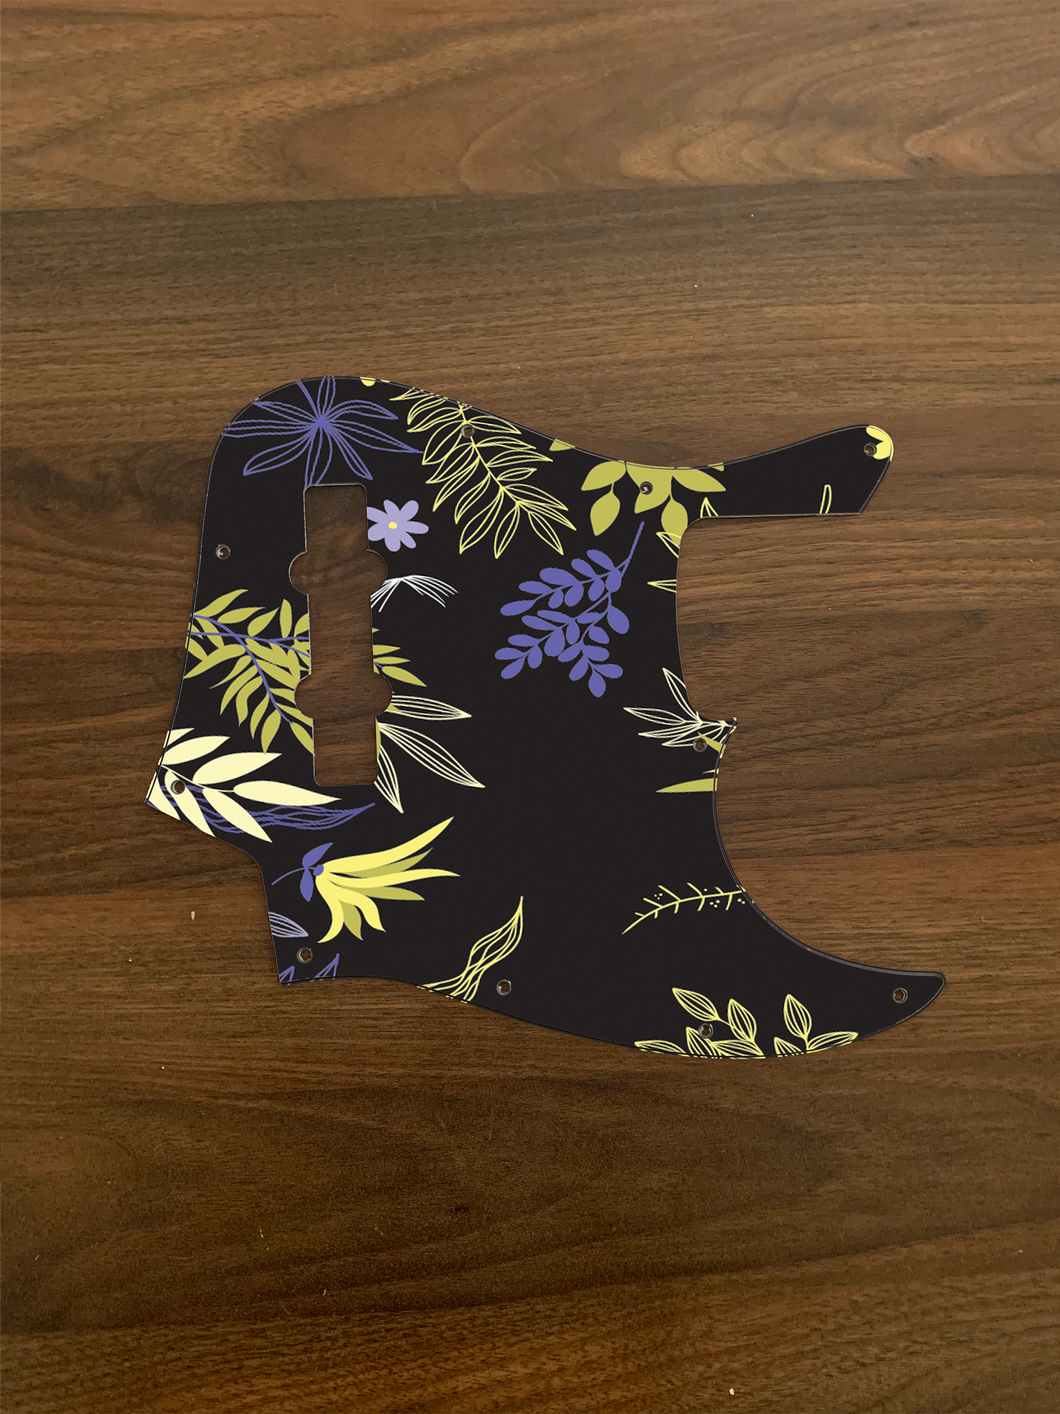 Floral 1-Floral Jazz Bass Pickguard by Carmedon